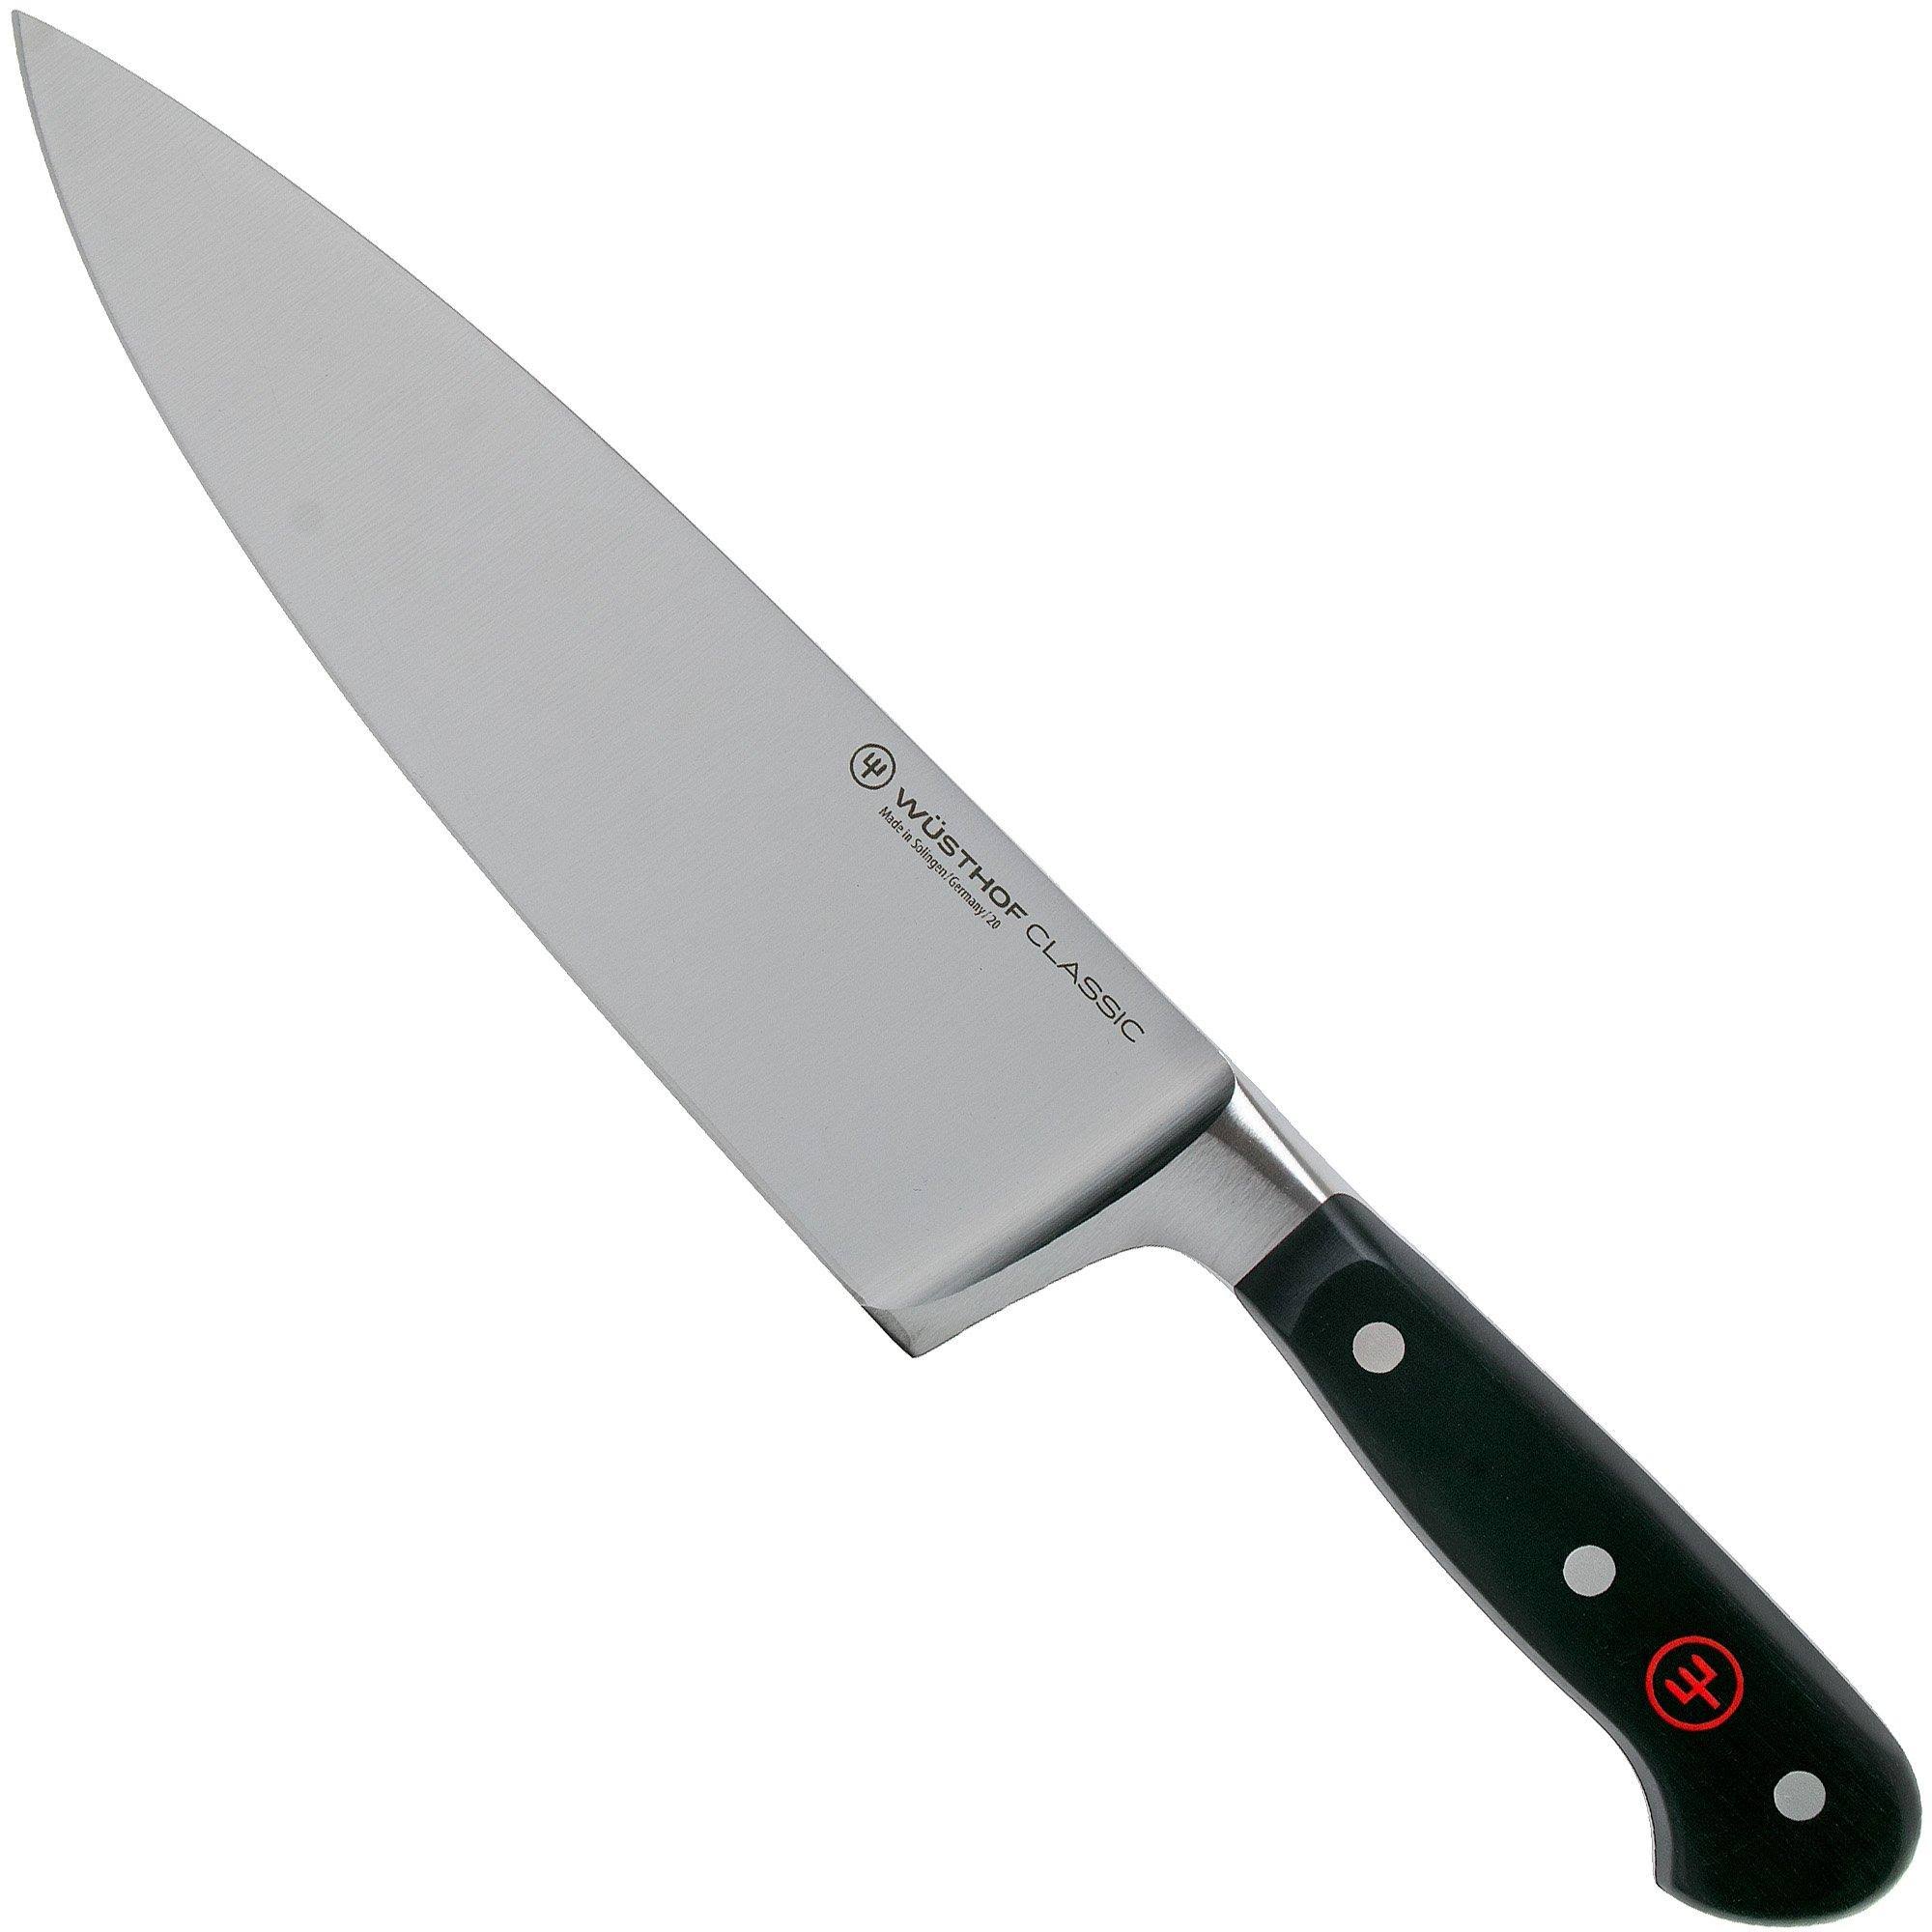 Wüsthof Classic extra-wide chef's knife 20 cm, 1040104120